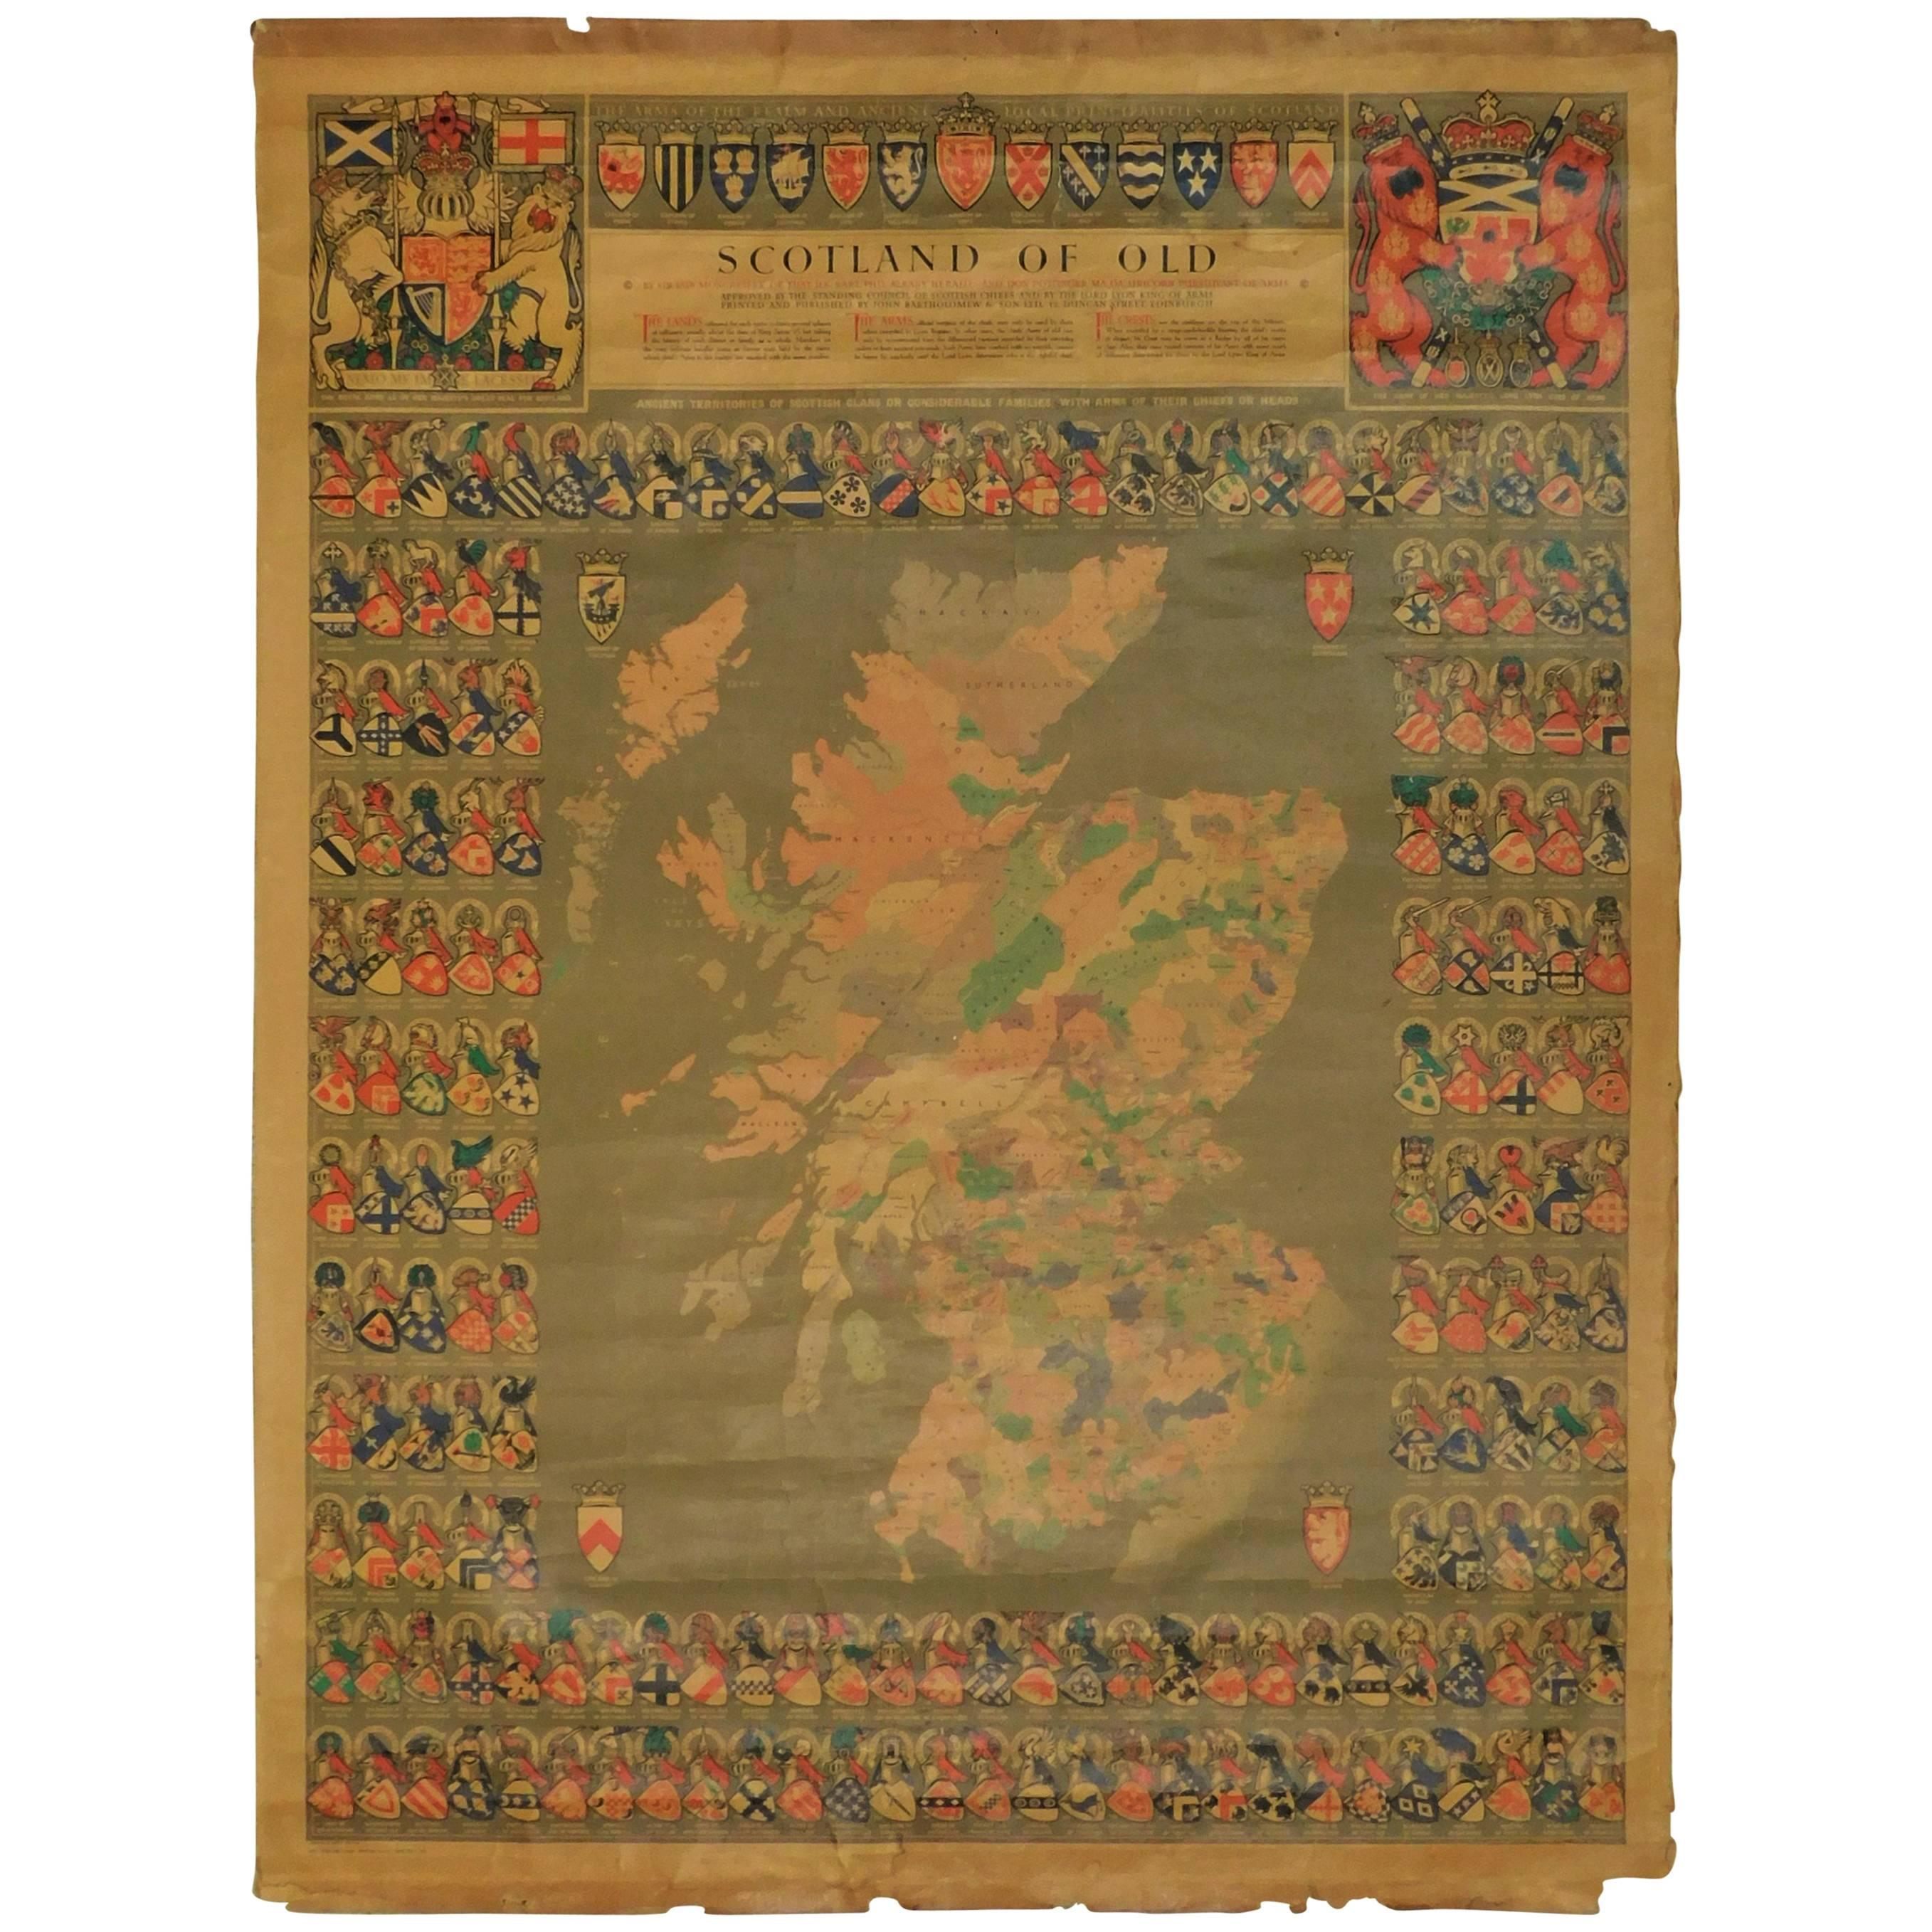 Original Historical Cloth Clan Map of Medieval Scotland of Old